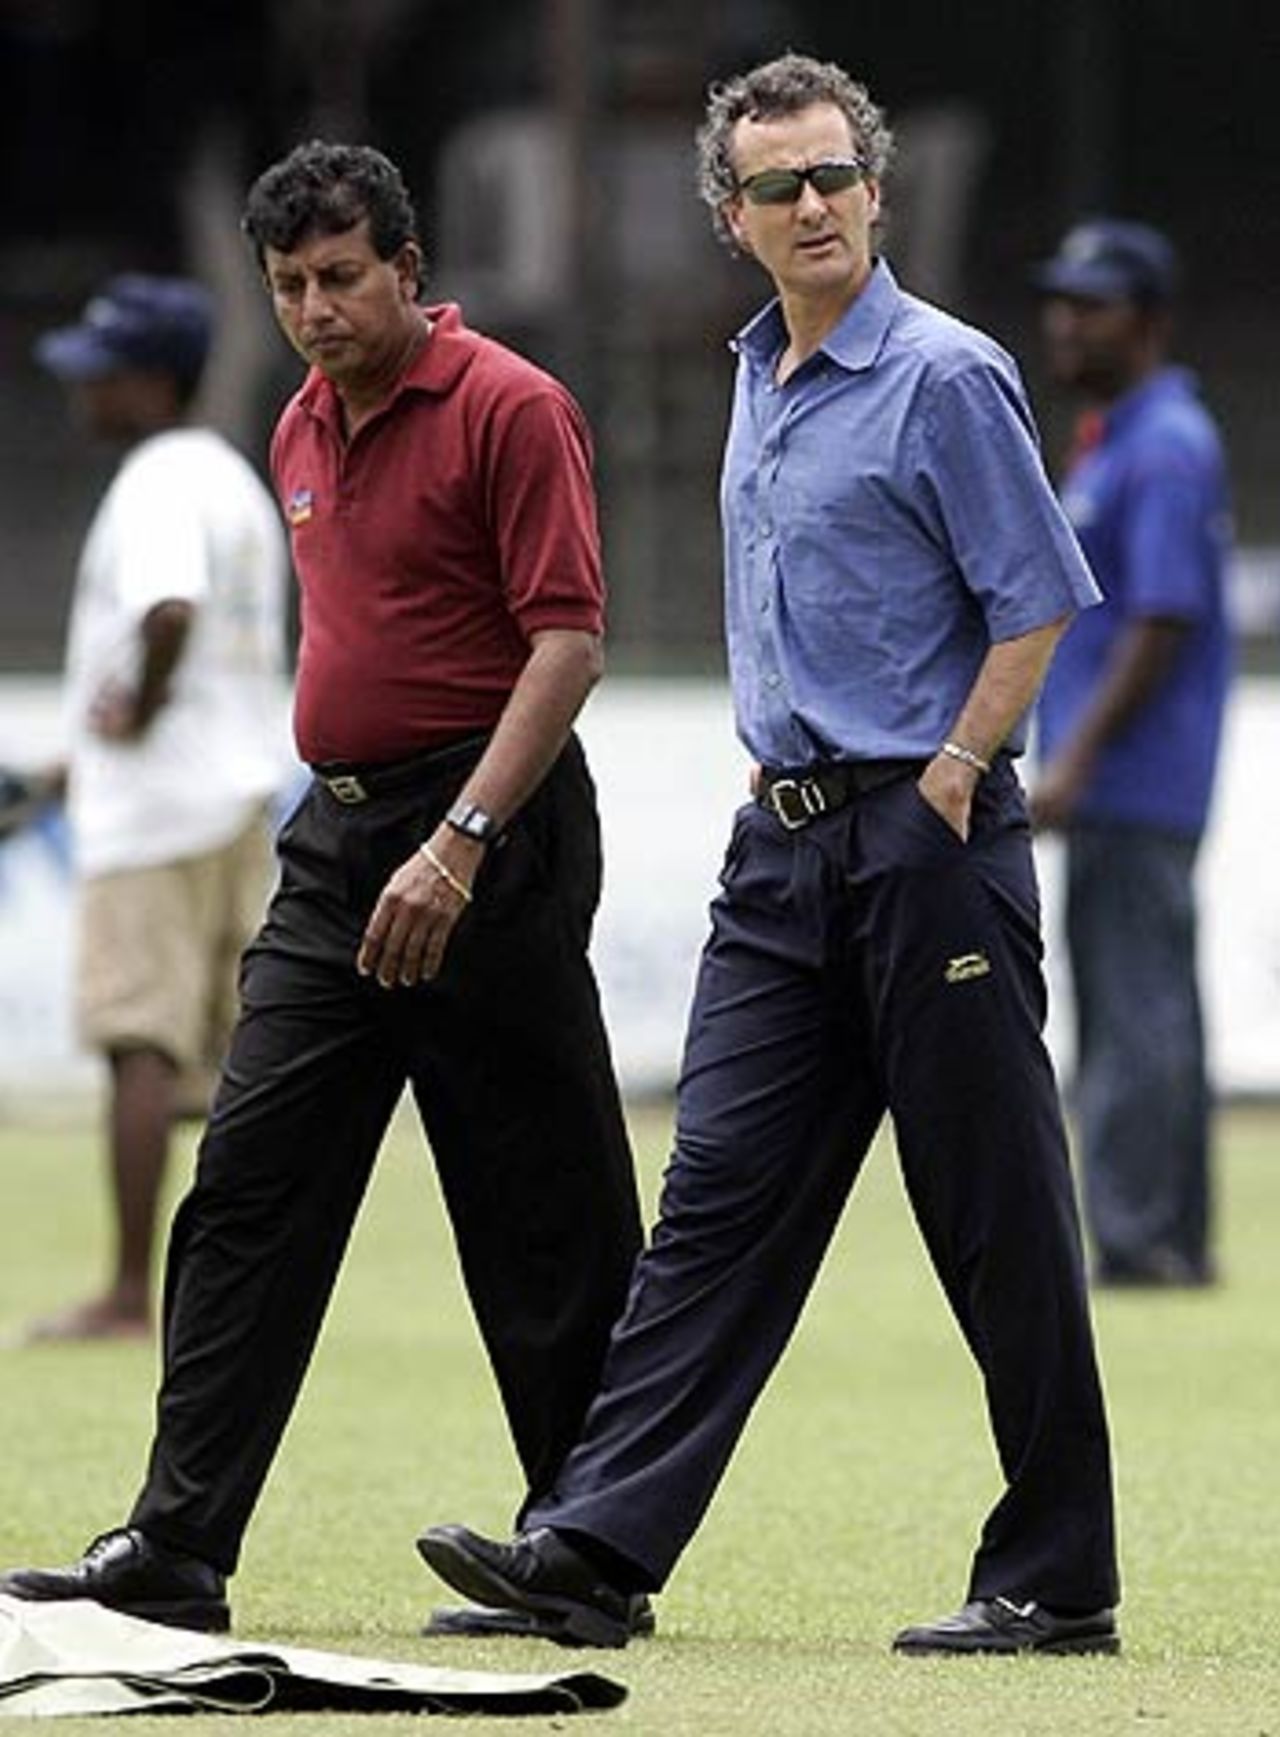 The umpires Billy Bowden and Asoka de Silva inspect the conditions at the SSC, Sri Lanka v India, 1st ODI, Colombo, August 18, 2006